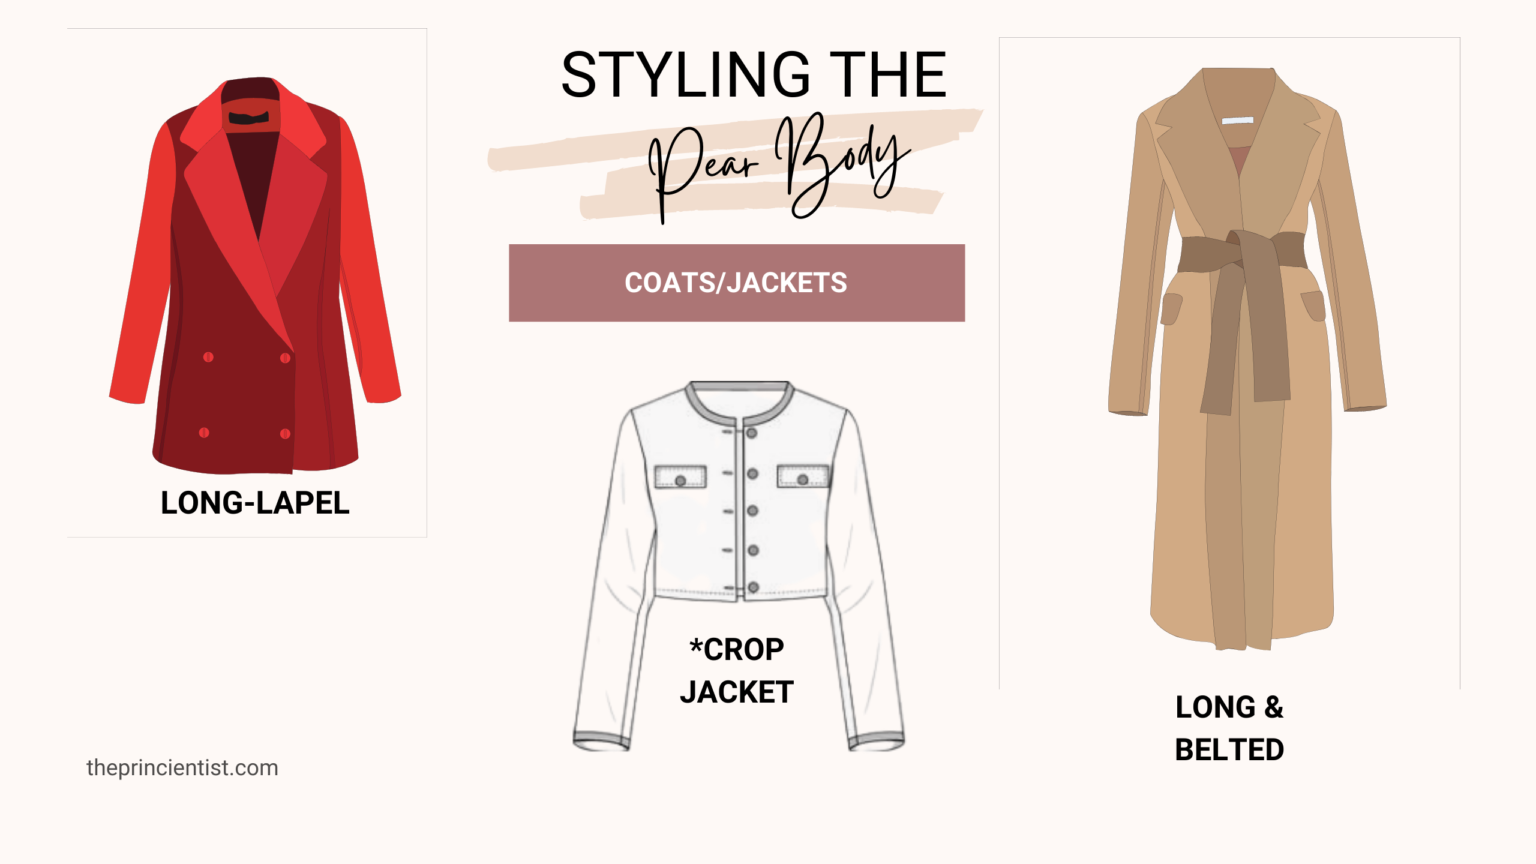 how to dress the pear shaped body - coats/jackets for the pear body 1